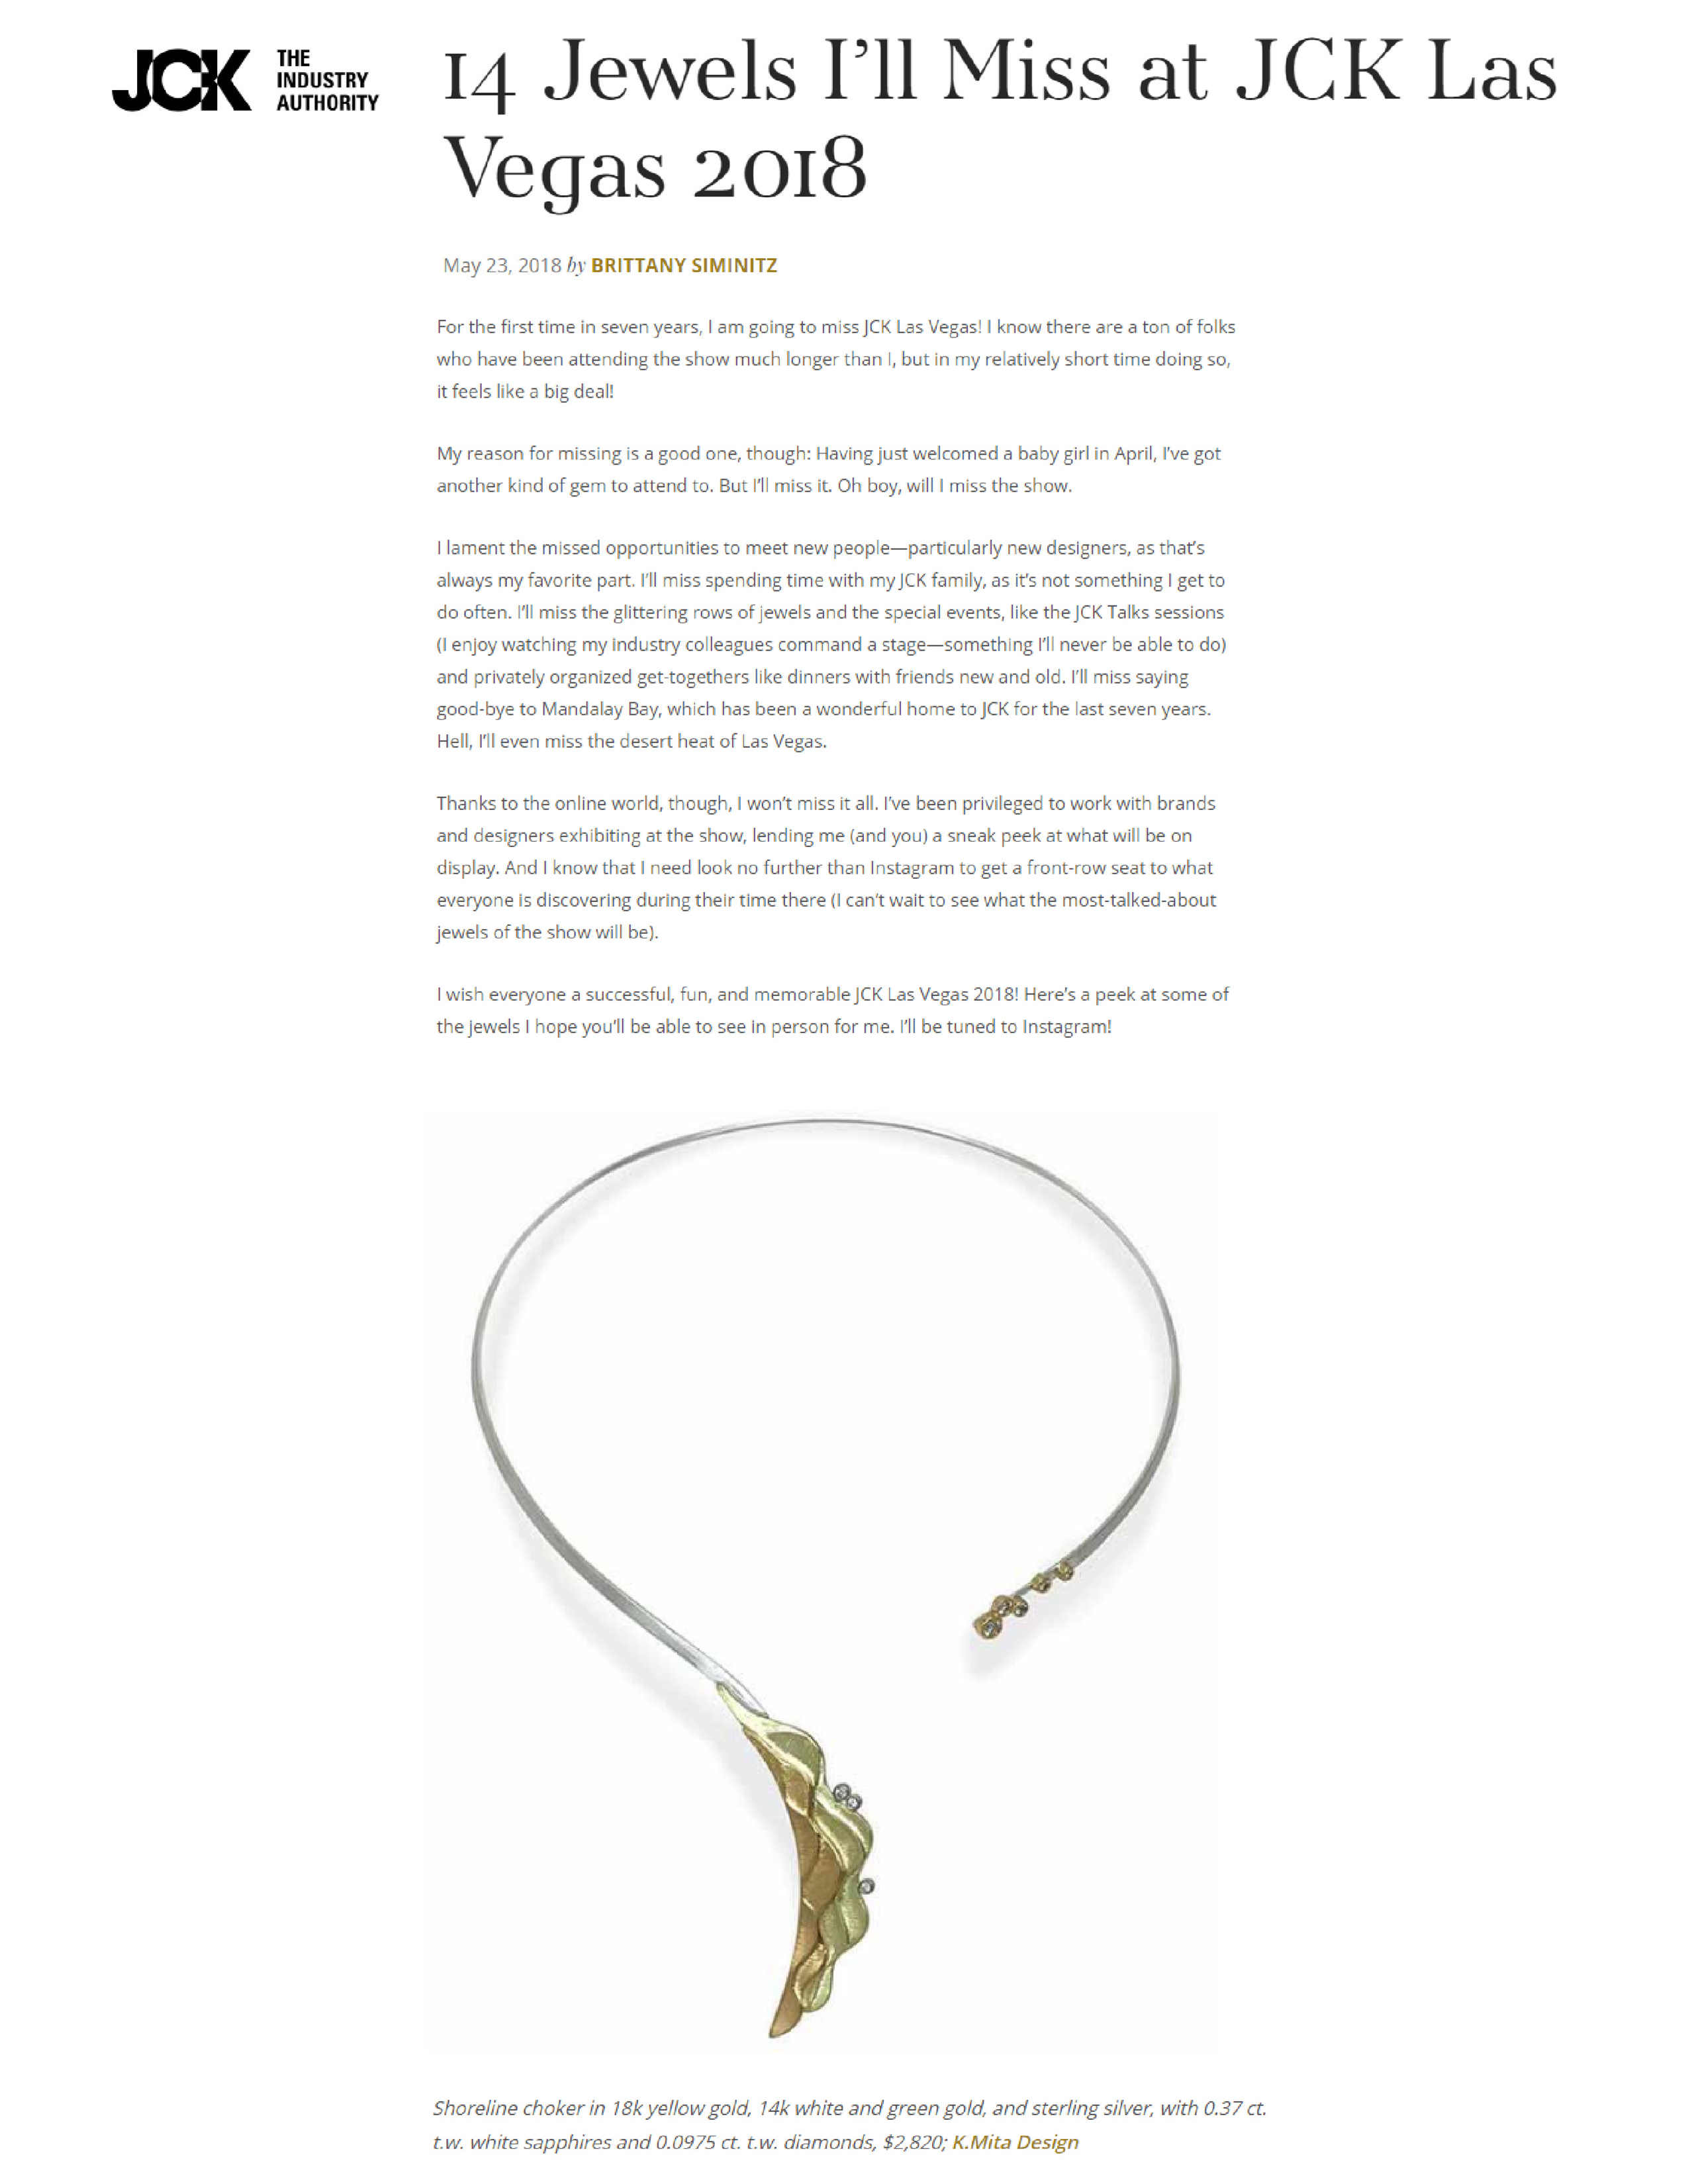 Shoreline Choker | 18k Yellow Gold 14k Green and White Gold Sterling Silver White Sapphires and Diamonds | jckonline.com May 2018 